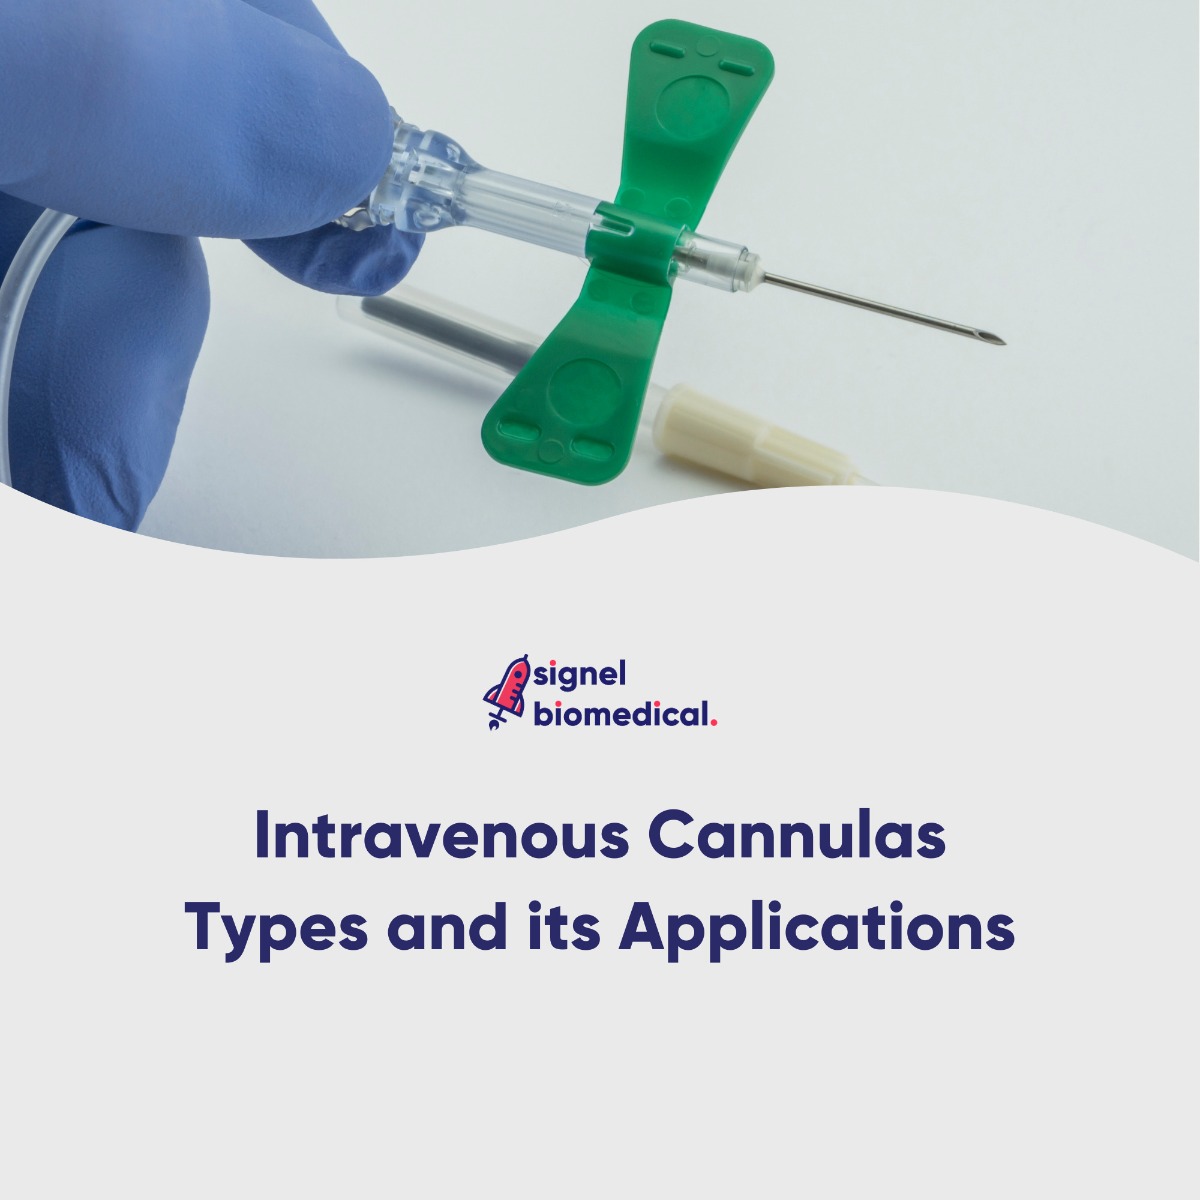 Intravenous Cannulas: Types and its applications